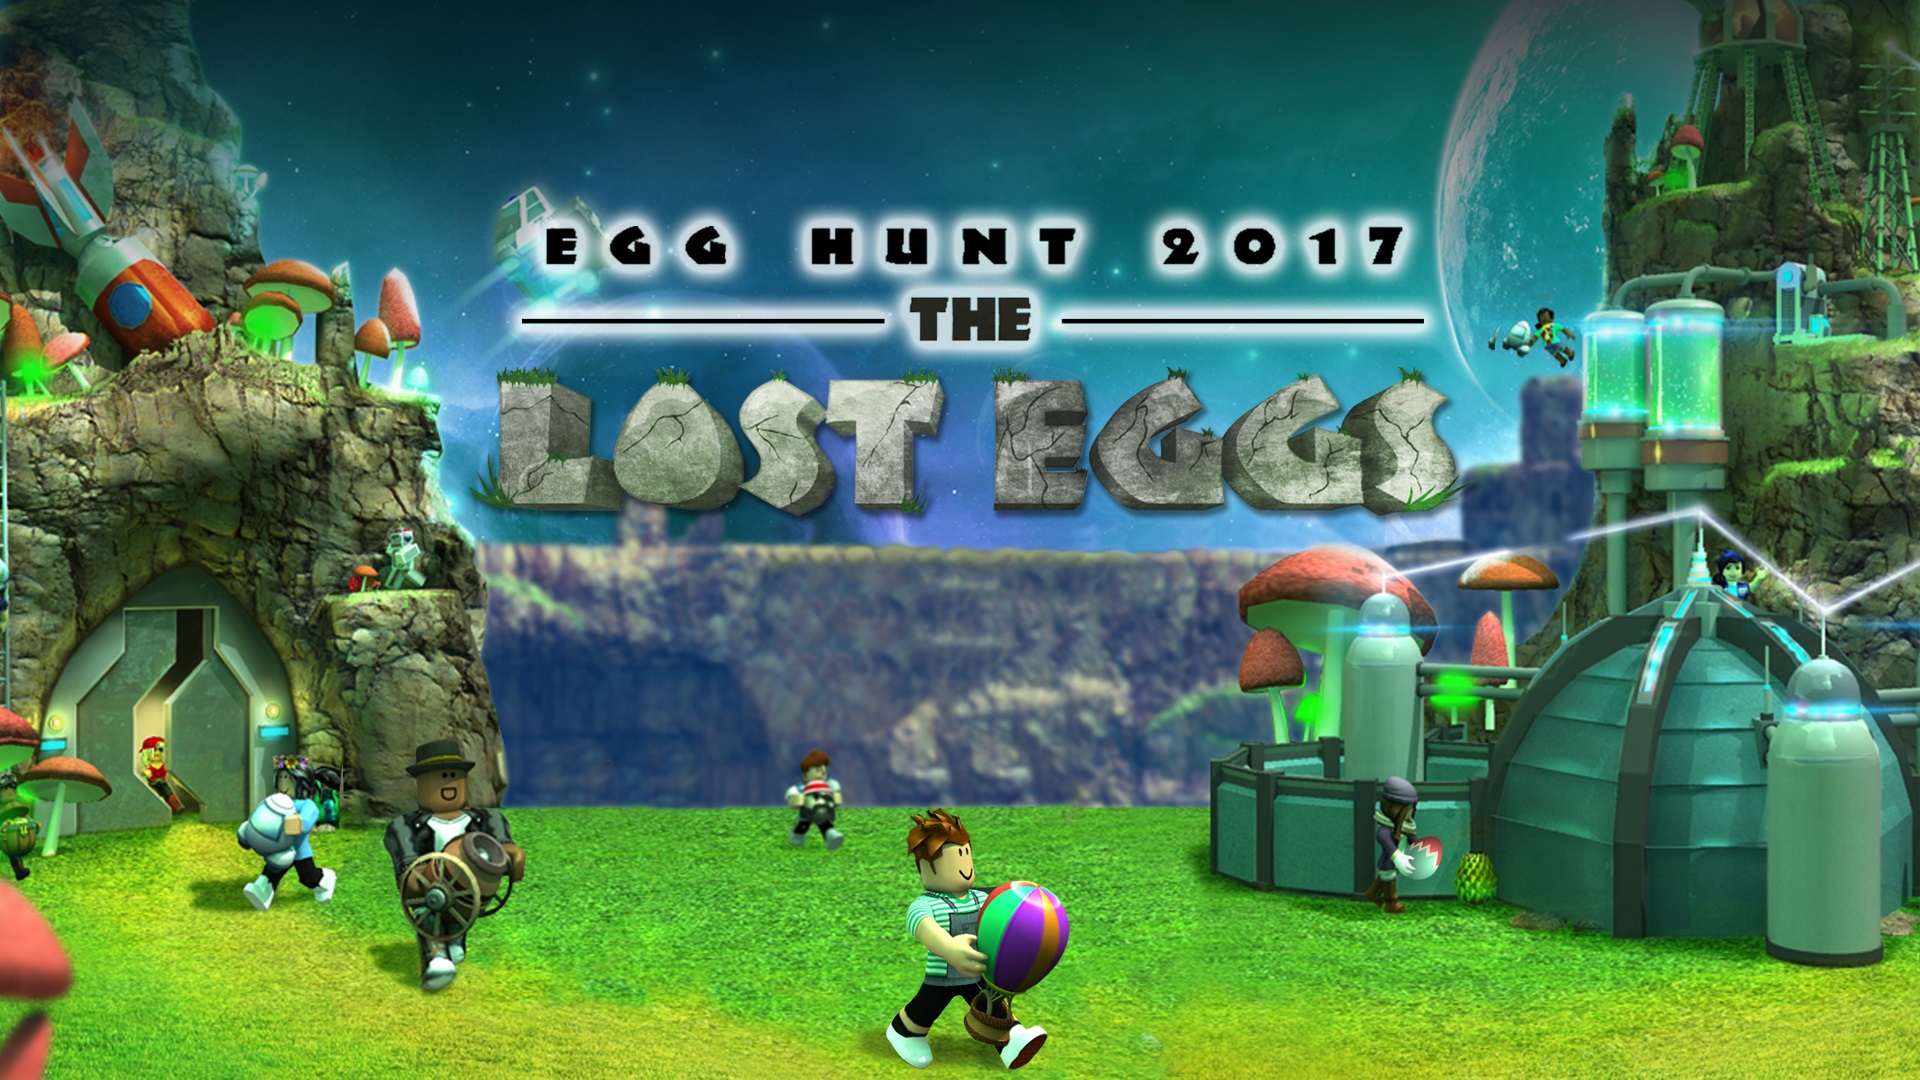 Egg Hunt 2017 The Lost Eggs Roblox Wikia Fandom - roblox fishing colony tycoon part 2